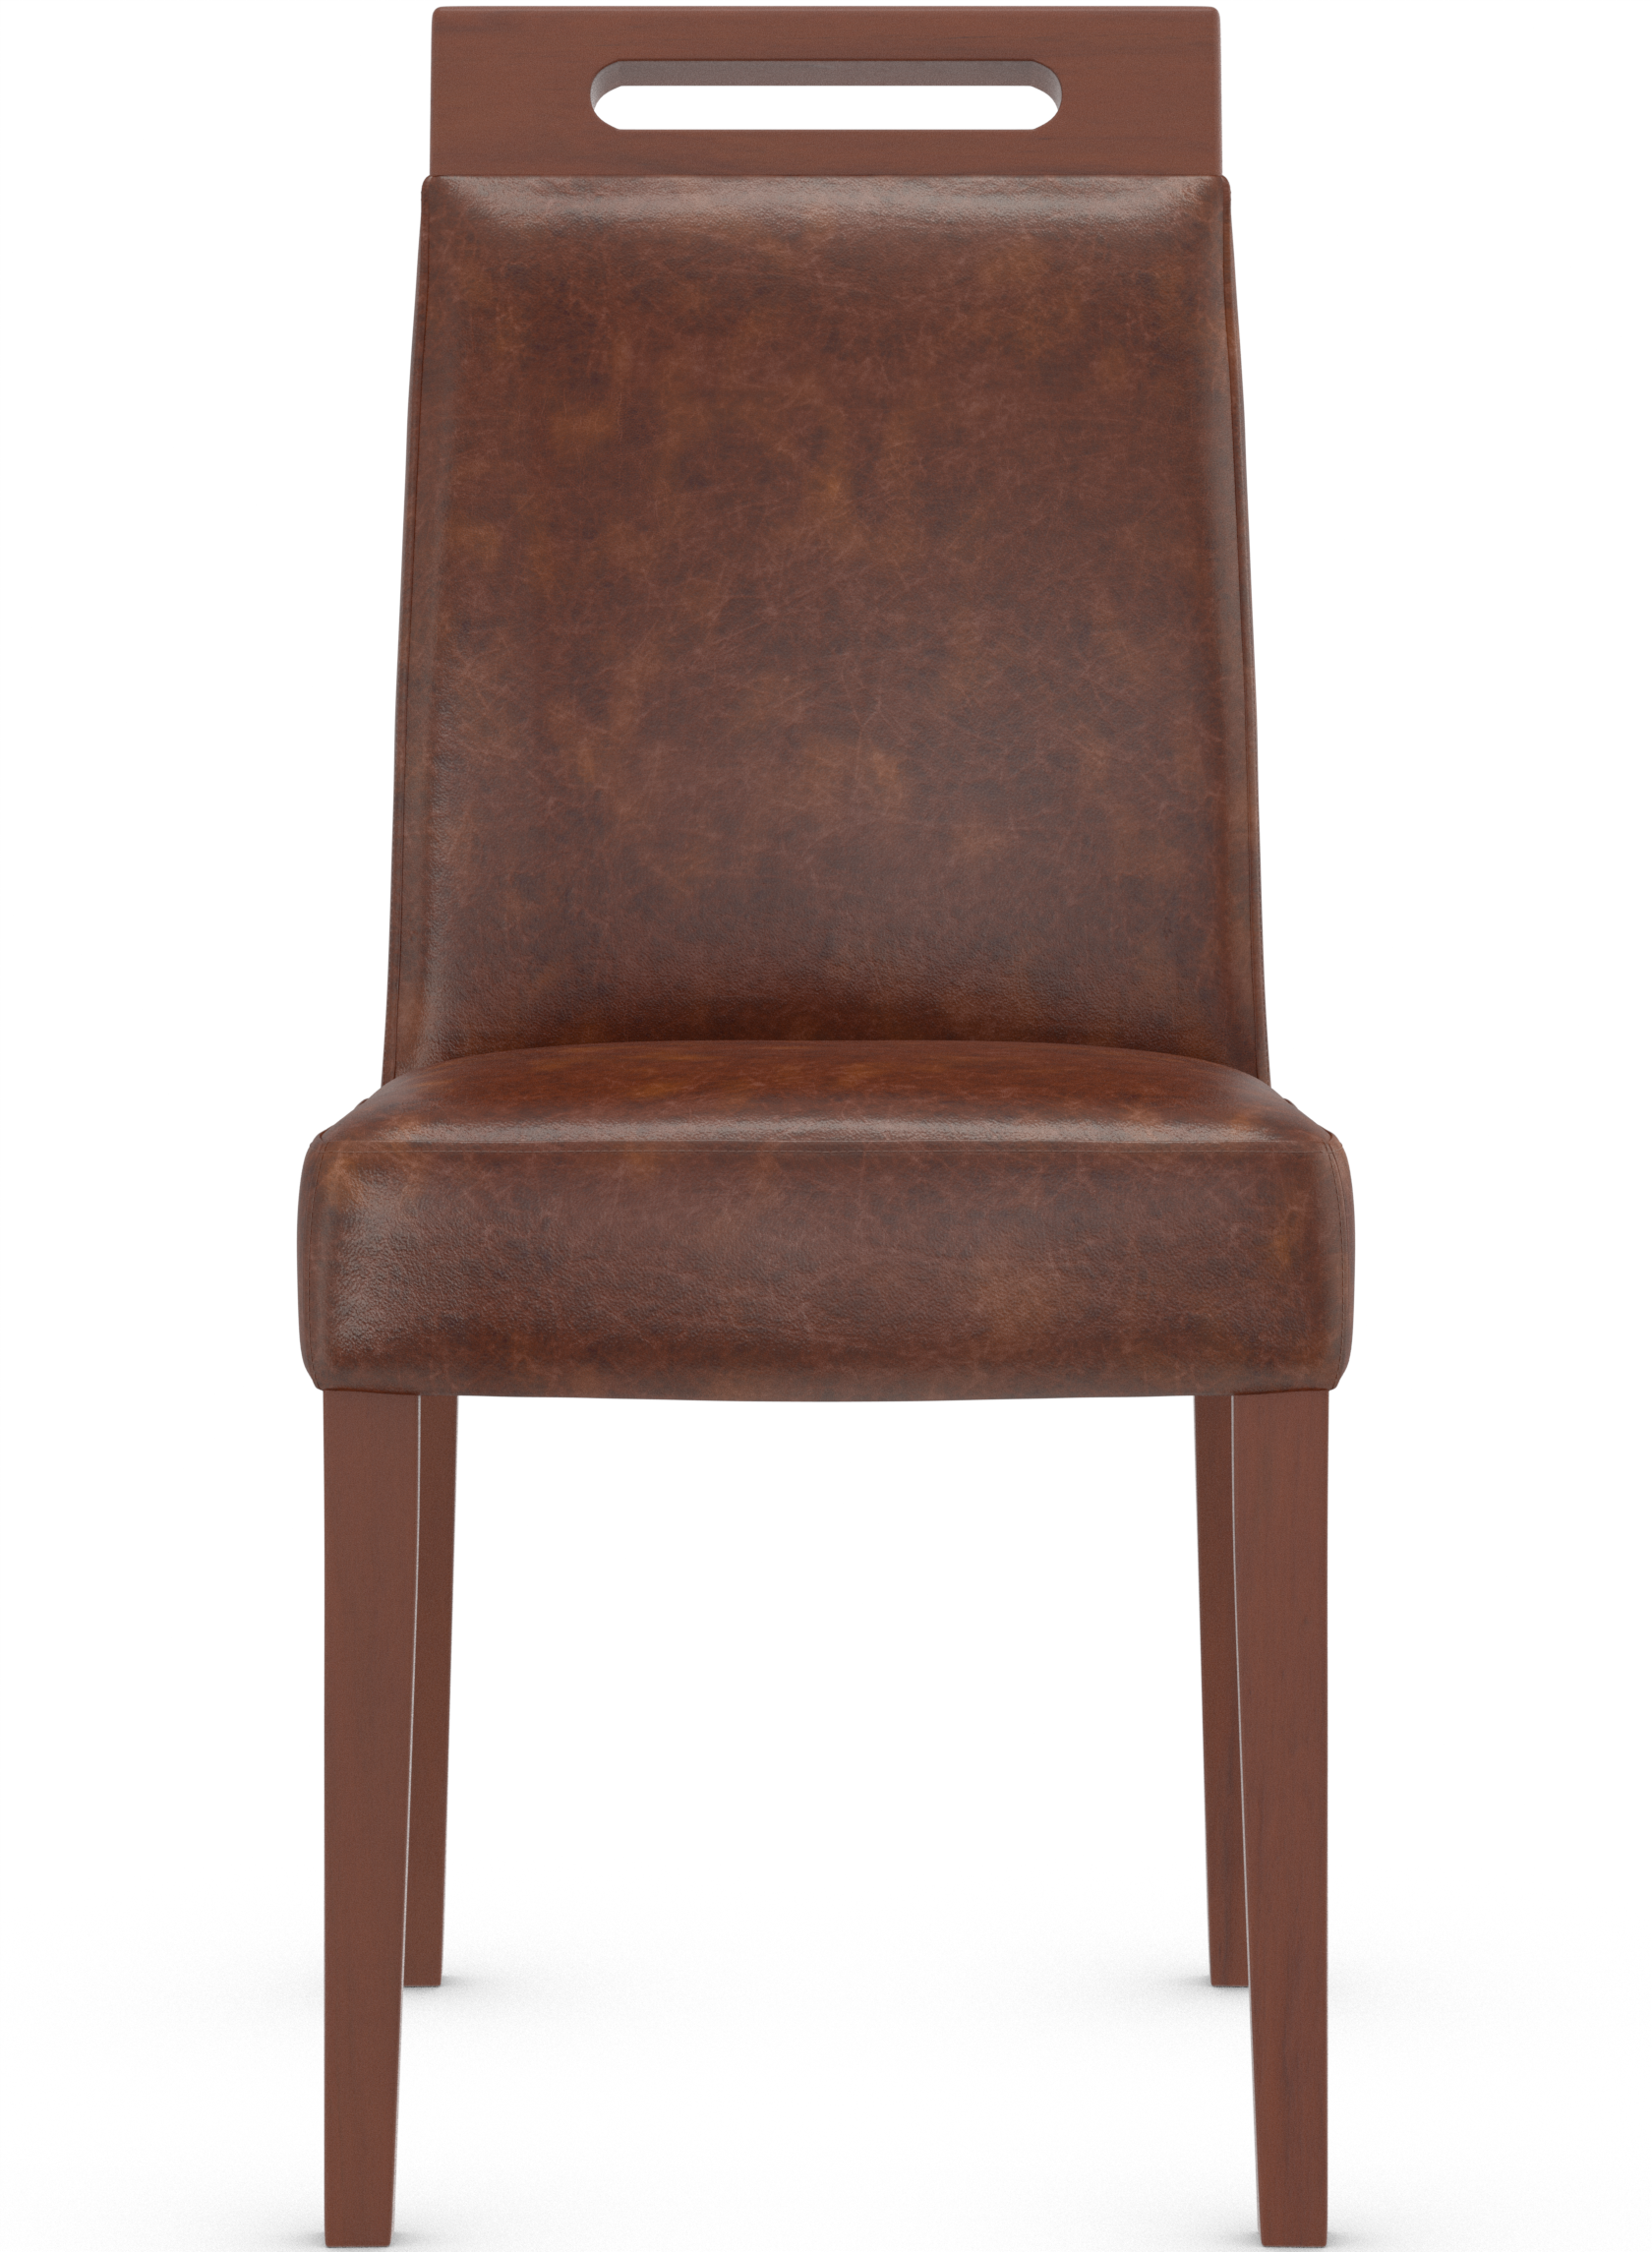 Modena Light Oak Dining Chair Bonded Leather